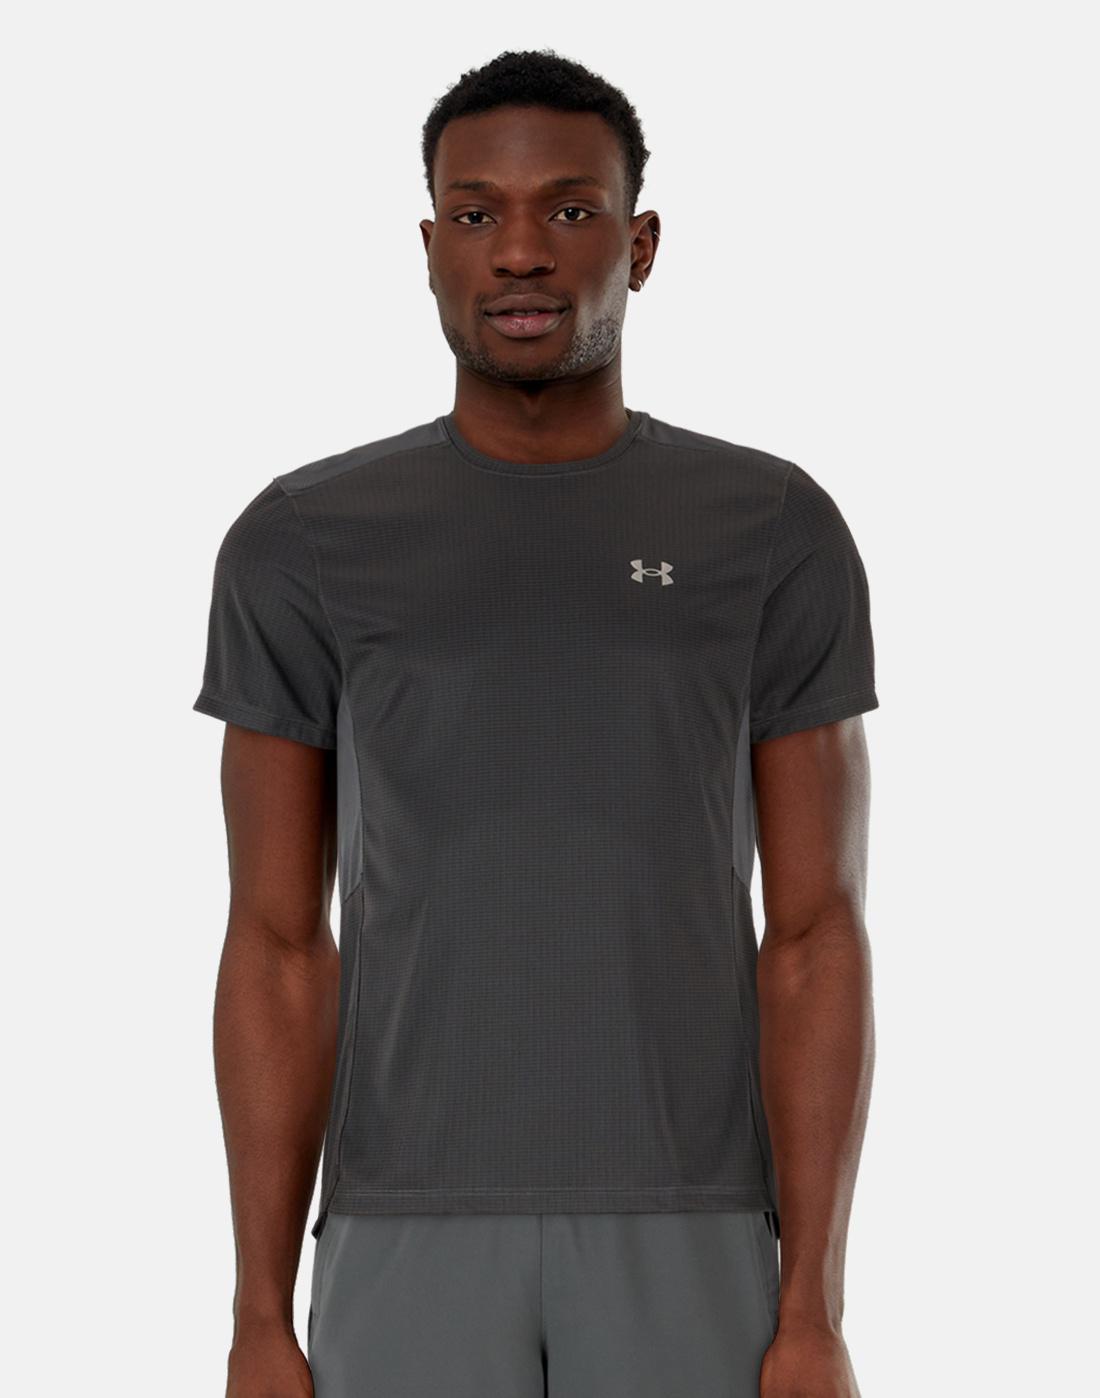 Under Armour Mens Speed Stride 2.0 T-Shirt - Grey | Life Style Sports EU